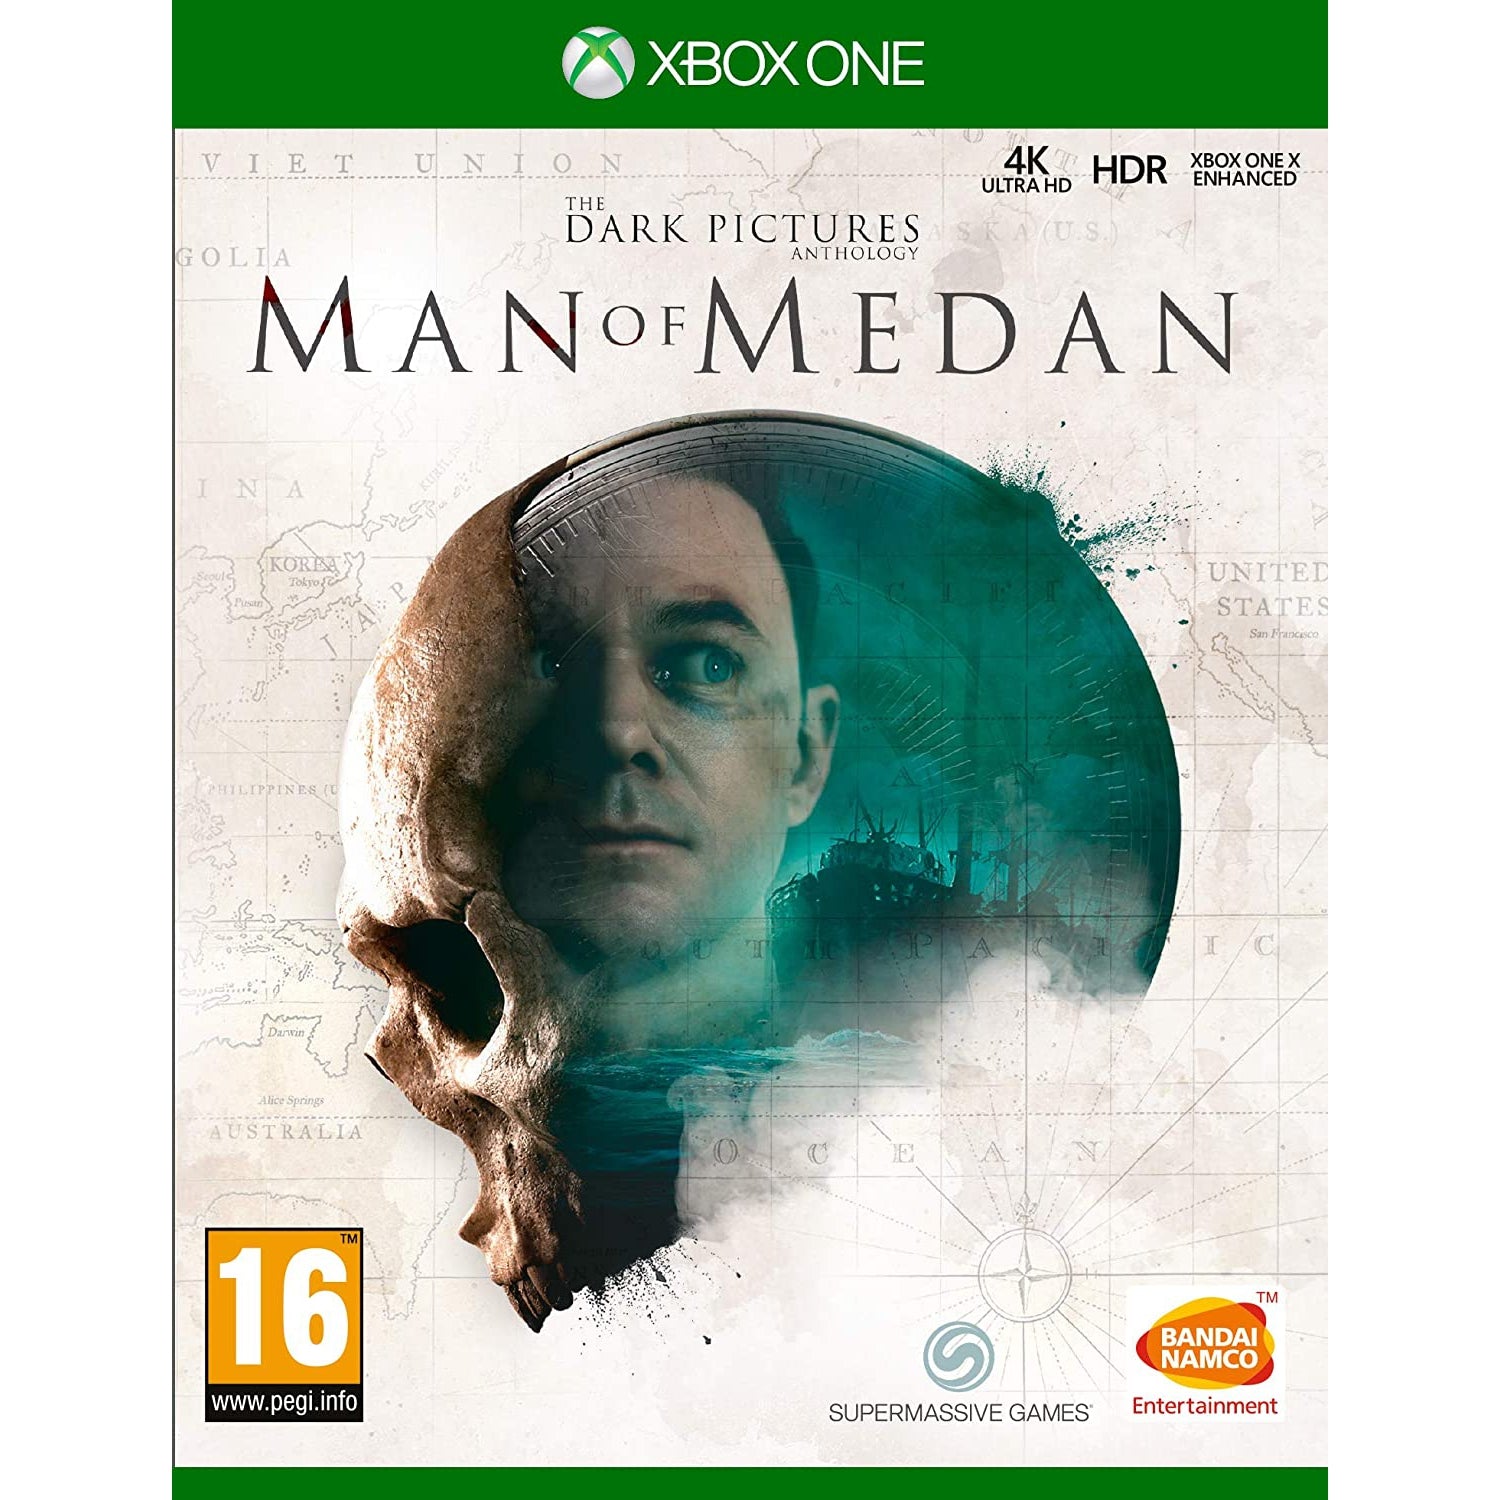 The Dark Pictures Anthology Man of Medan (Xbox One)